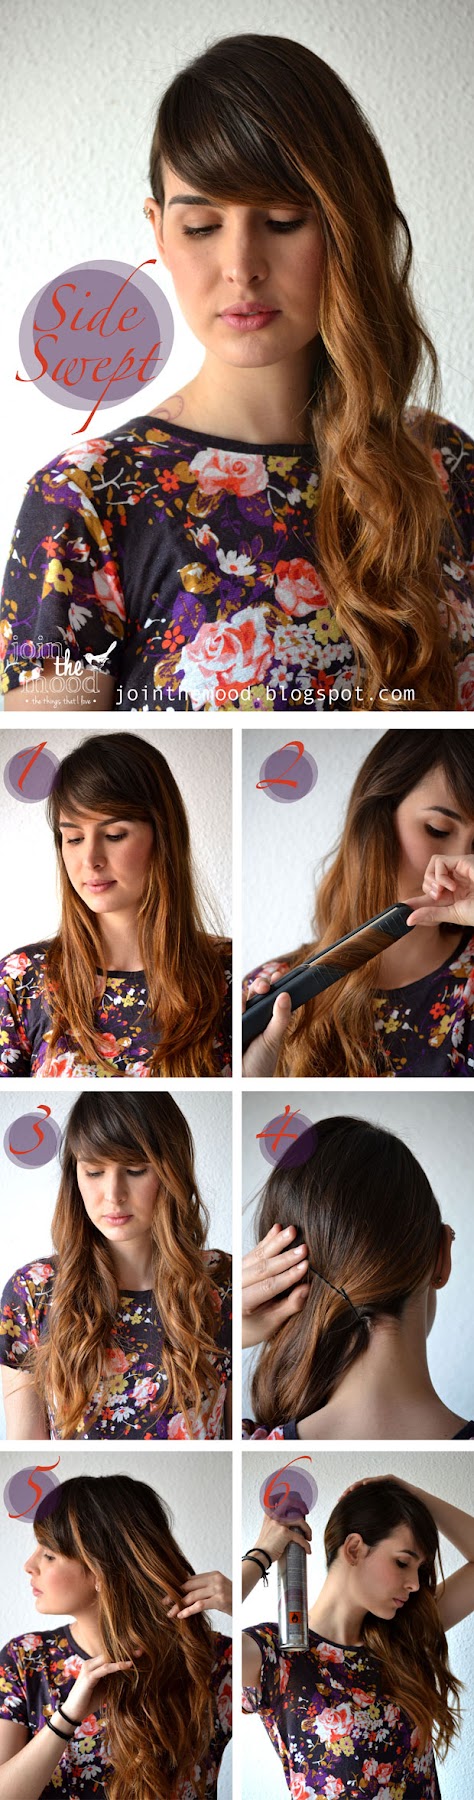 Make a Side Swept Hairstyle